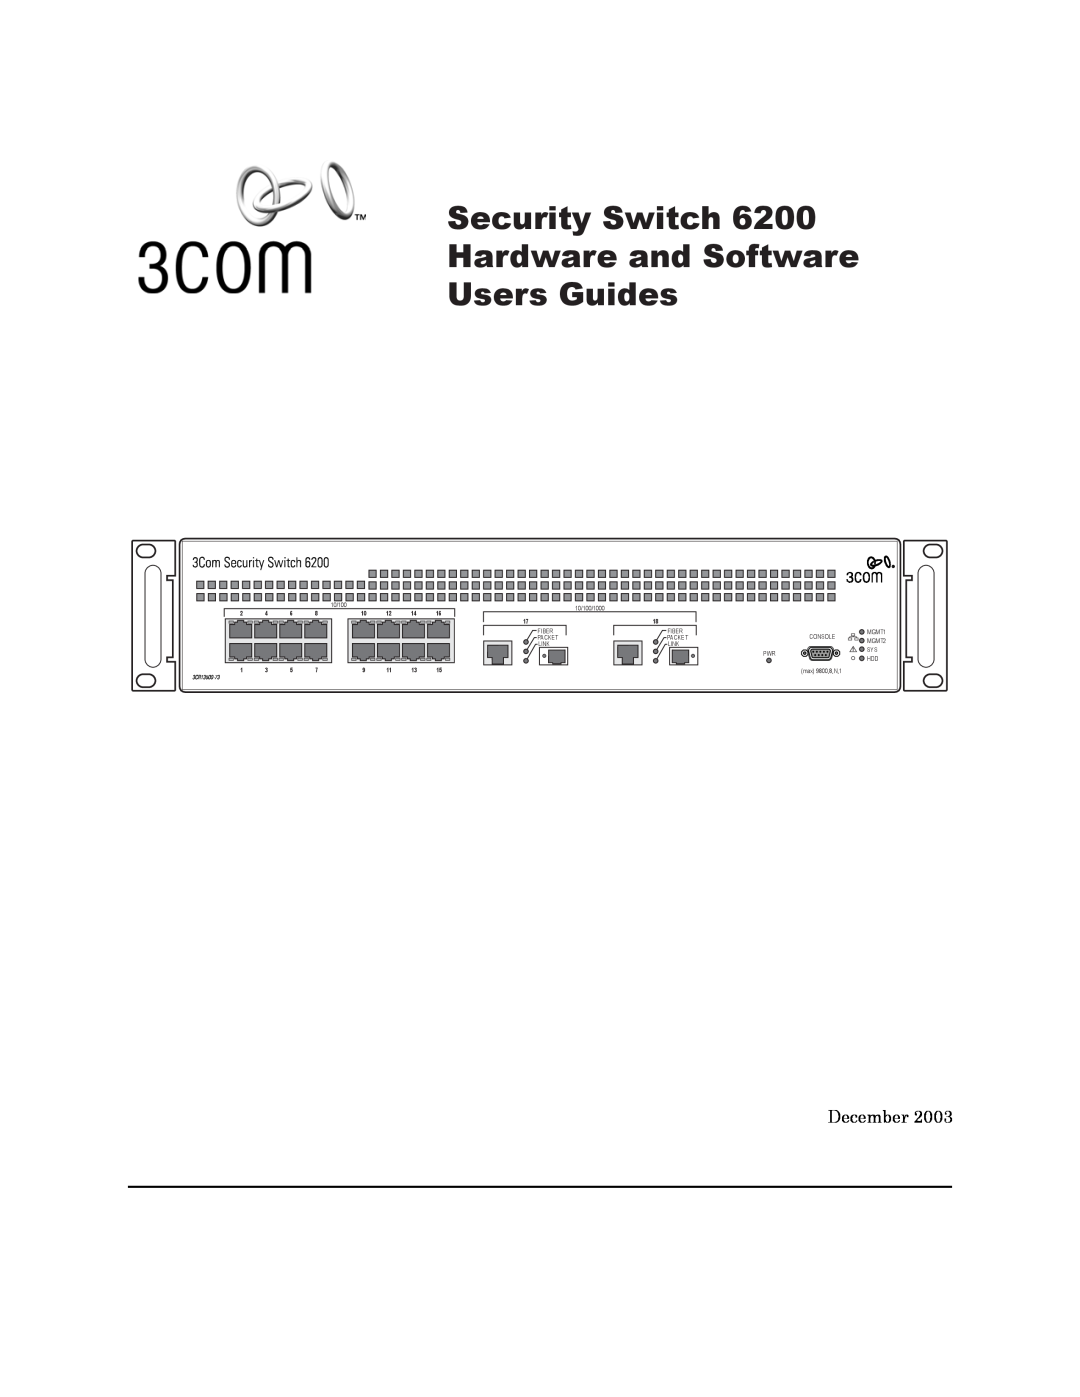 3Com 6200 manual Security Switch Hardware and Software Users Guides, 10/100/1000, Fiber, Console, MGMT1, Packet, MGMT2 